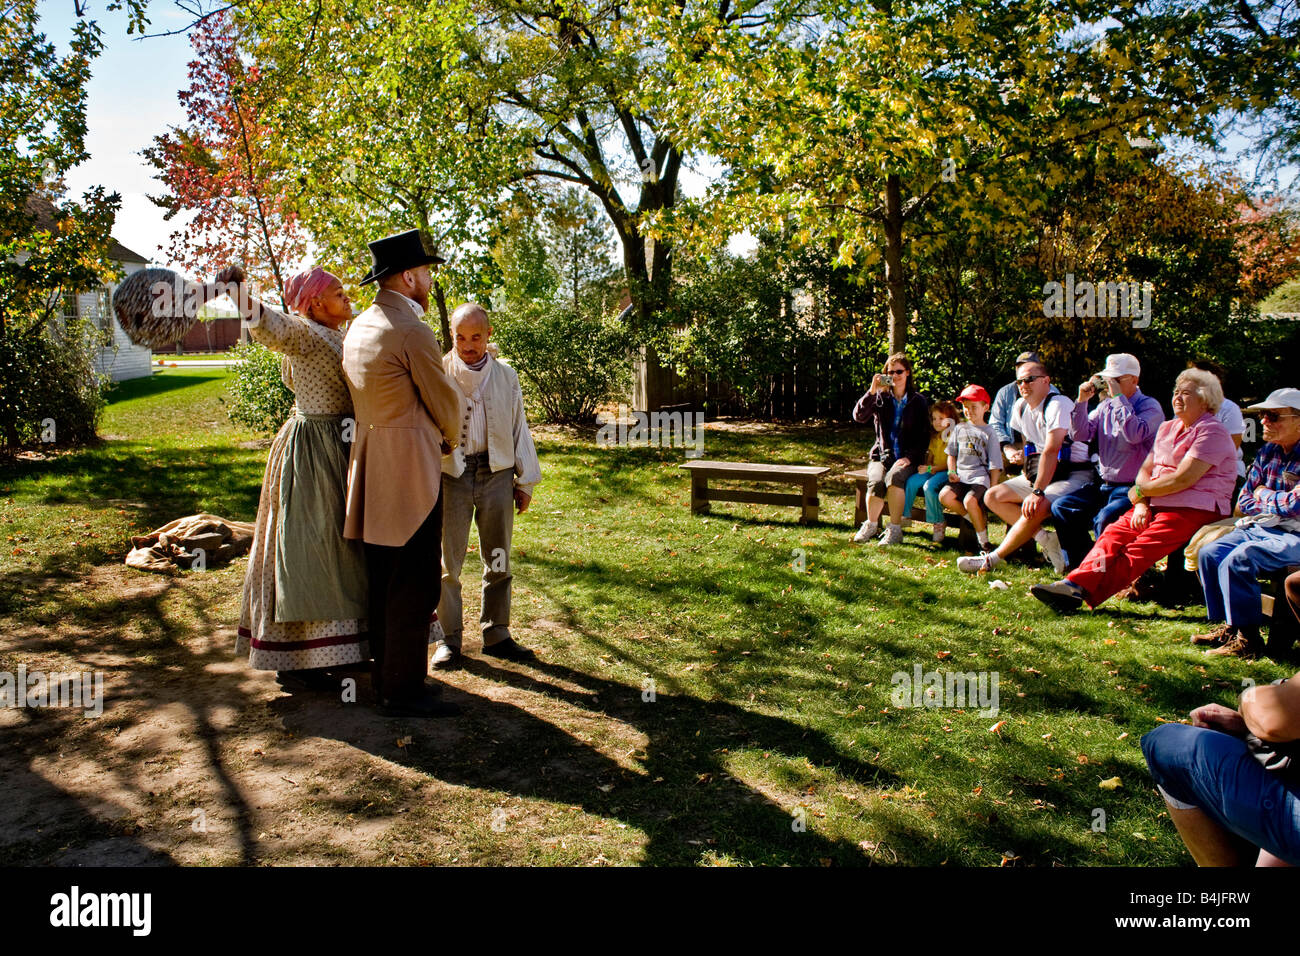 Performers in period costume act out pre Civil War slave tales at a replica of slave quarters at Greenfield Village Dearborn MI Stock Photo